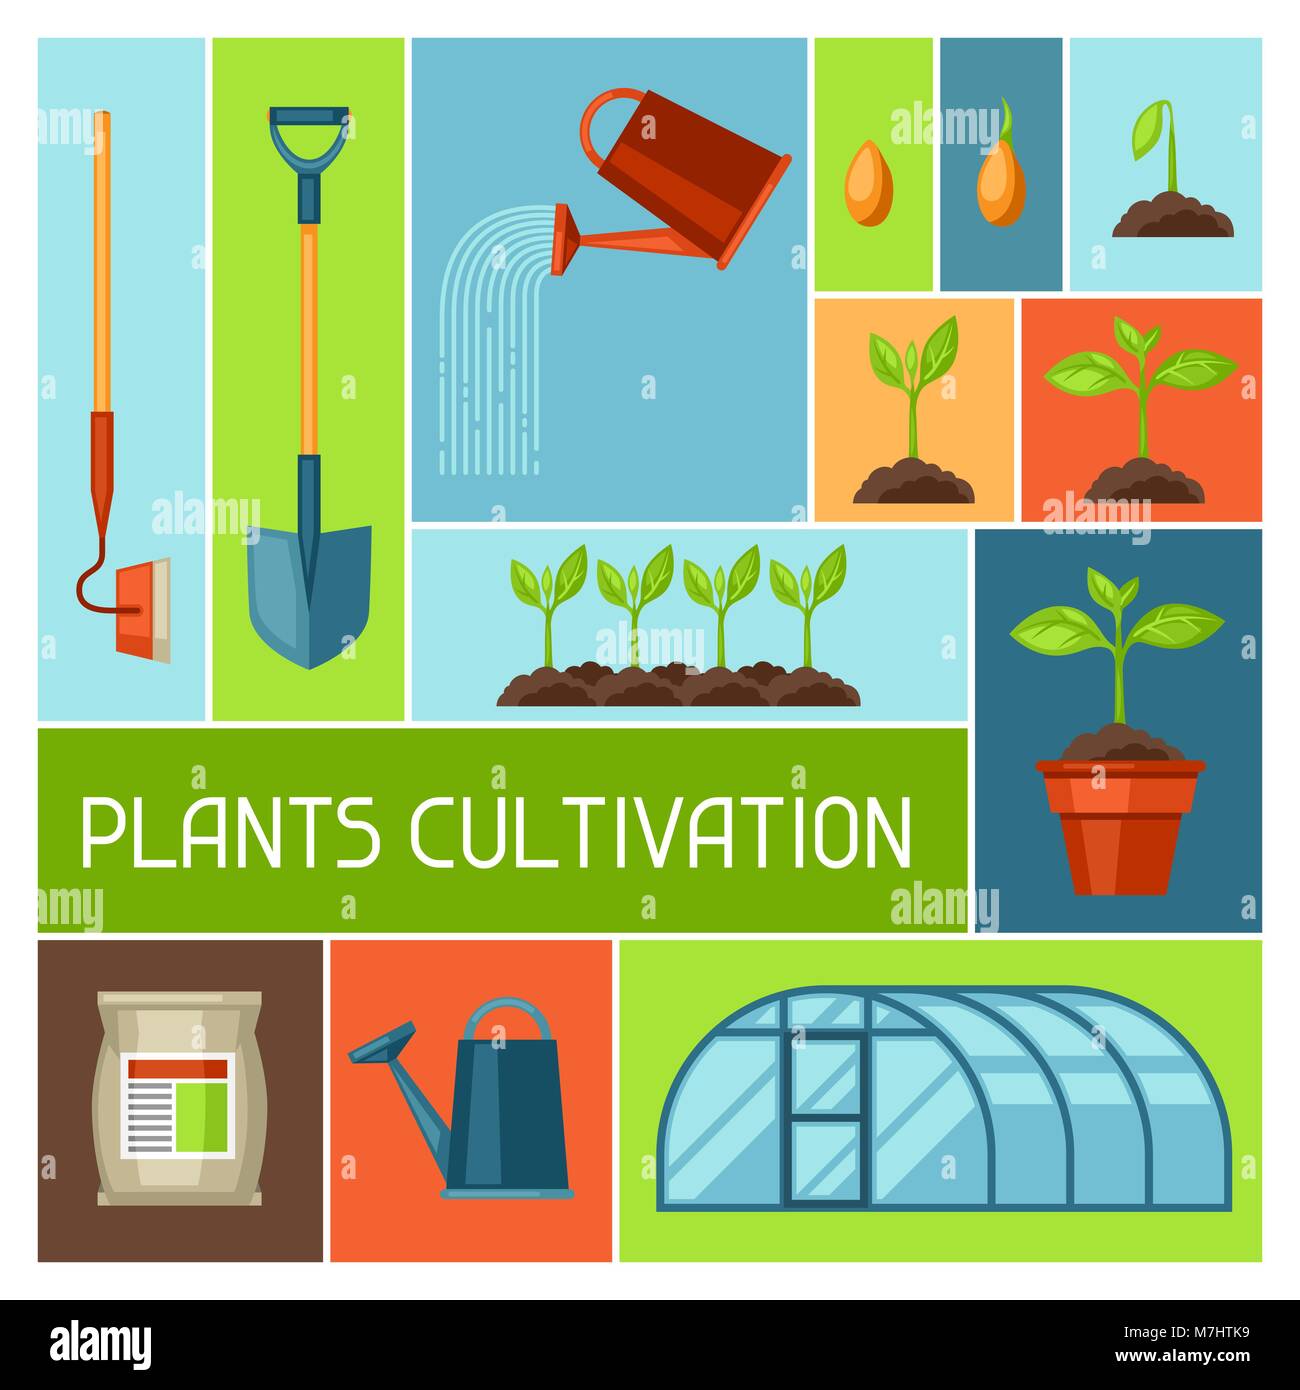 Background with agriculture objects. Instruments for cultivation, plants seedling process, stage plant growth, fertilizers and greenhouse Stock Vector